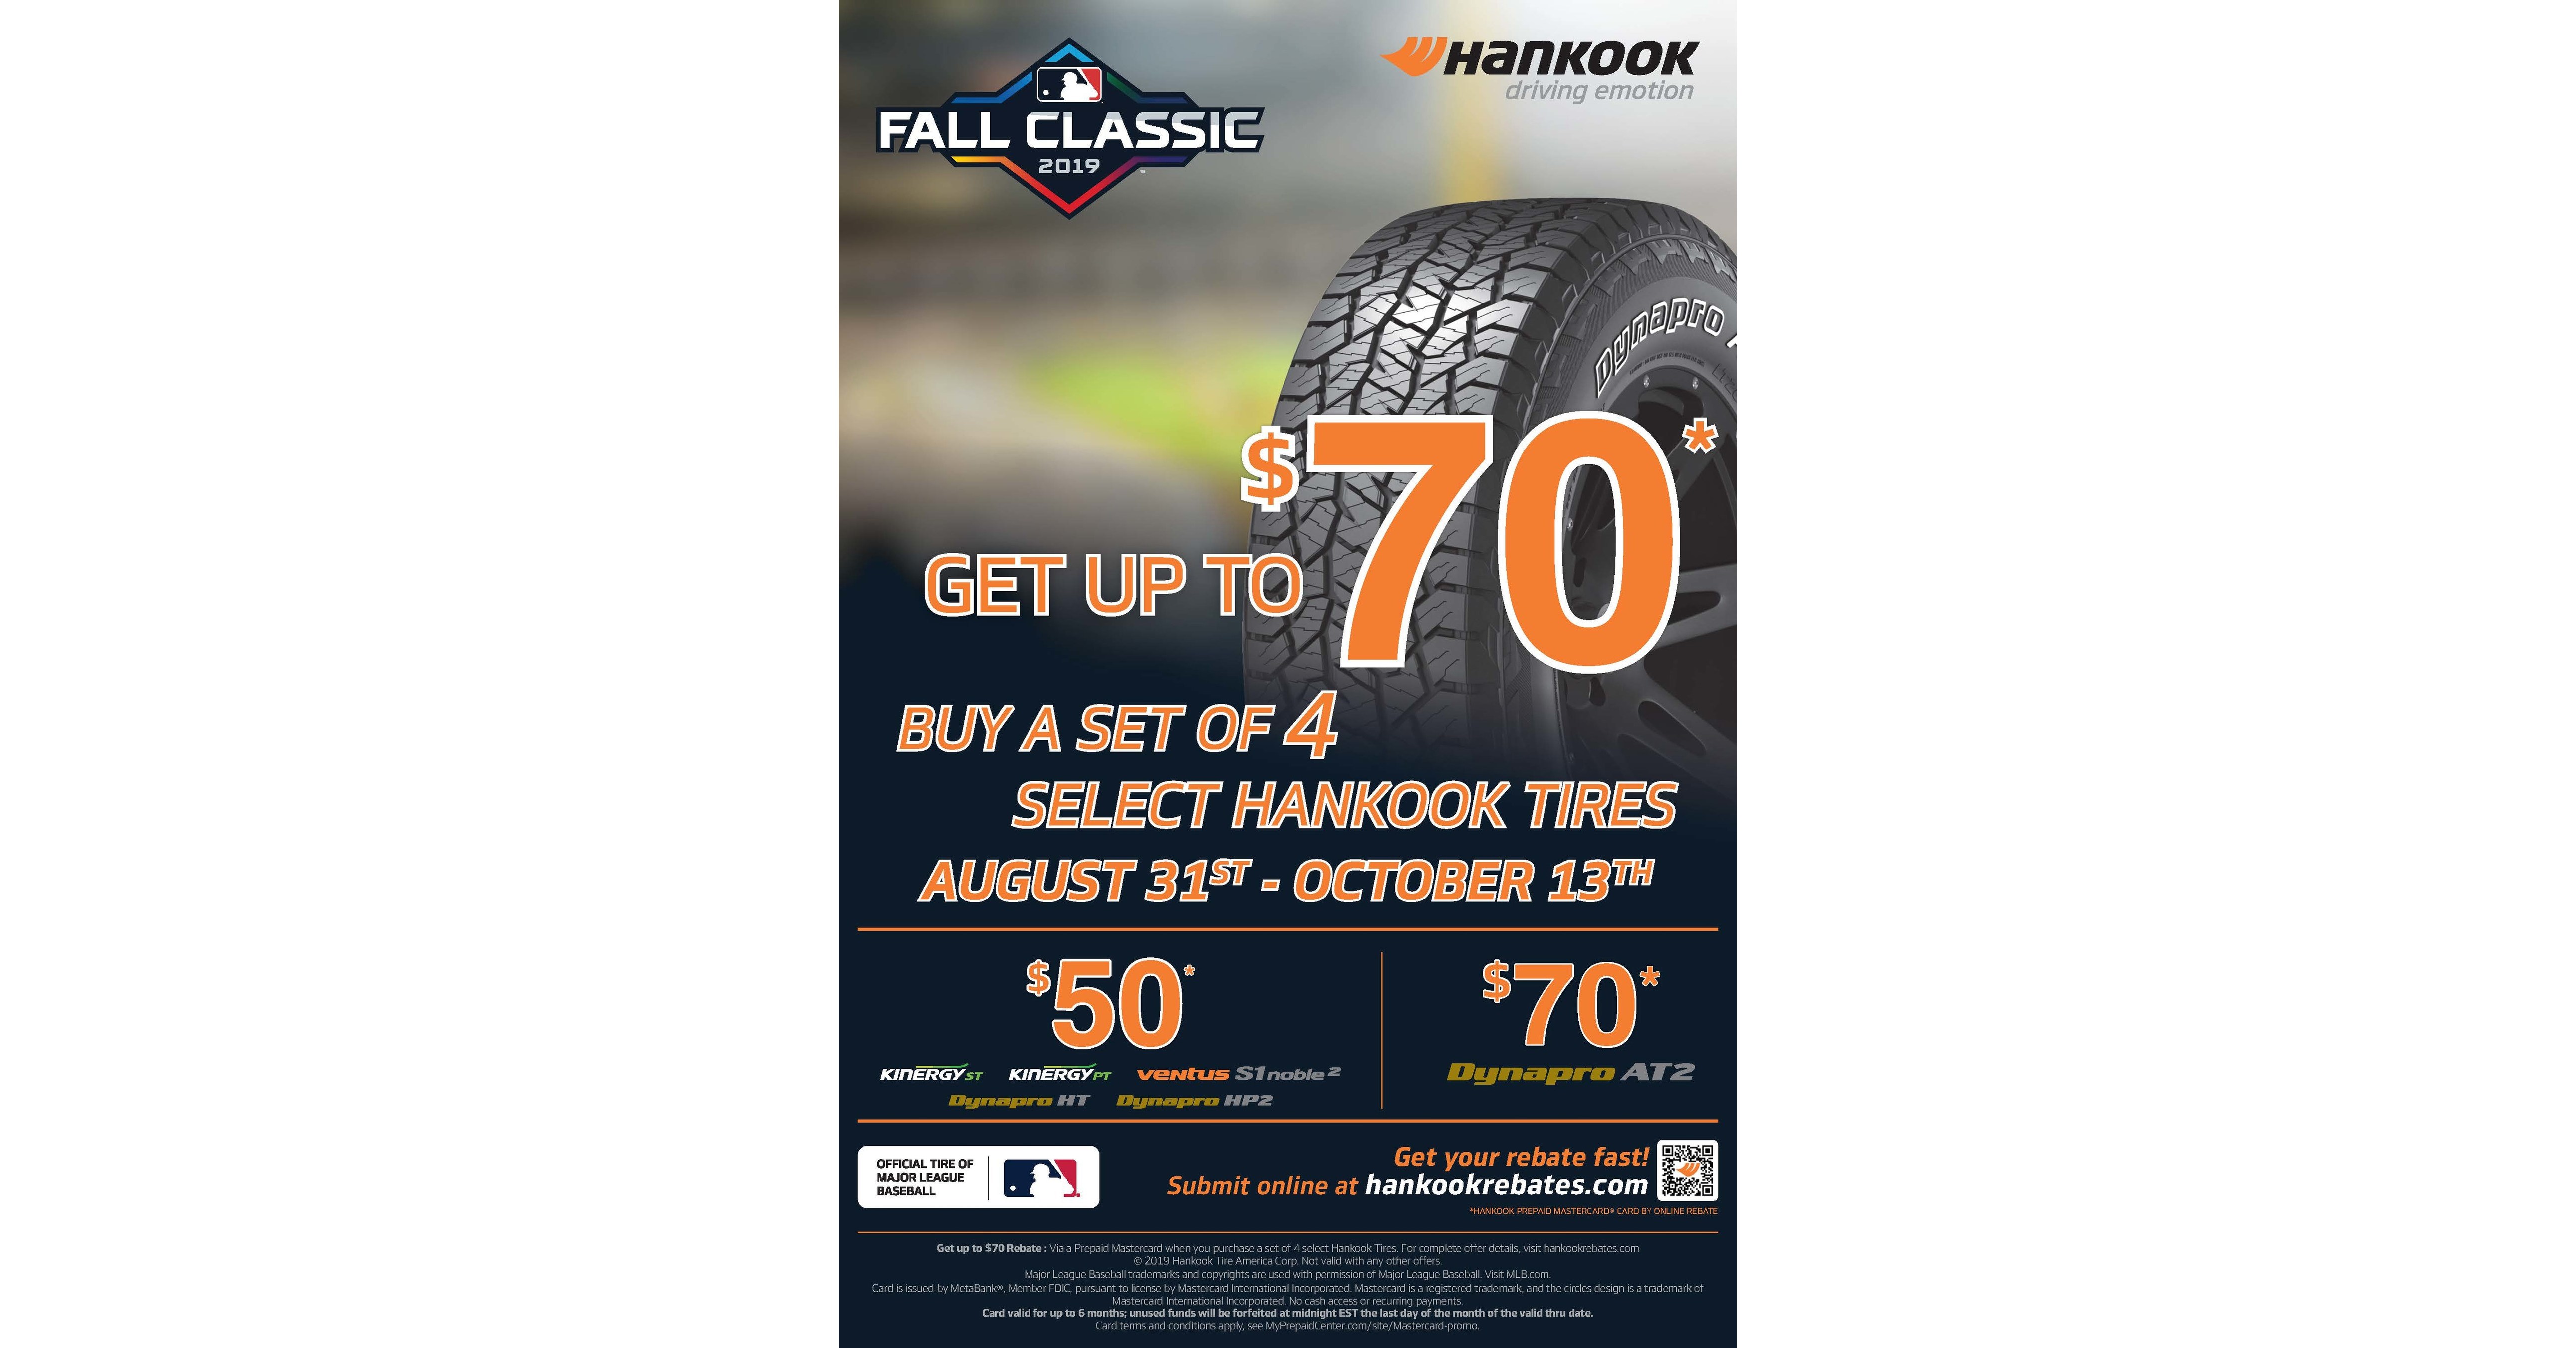 hankook-tire-s-fall-classic-rebate-hits-it-out-of-the-park-with-discounts-on-full-lineup-of-tires